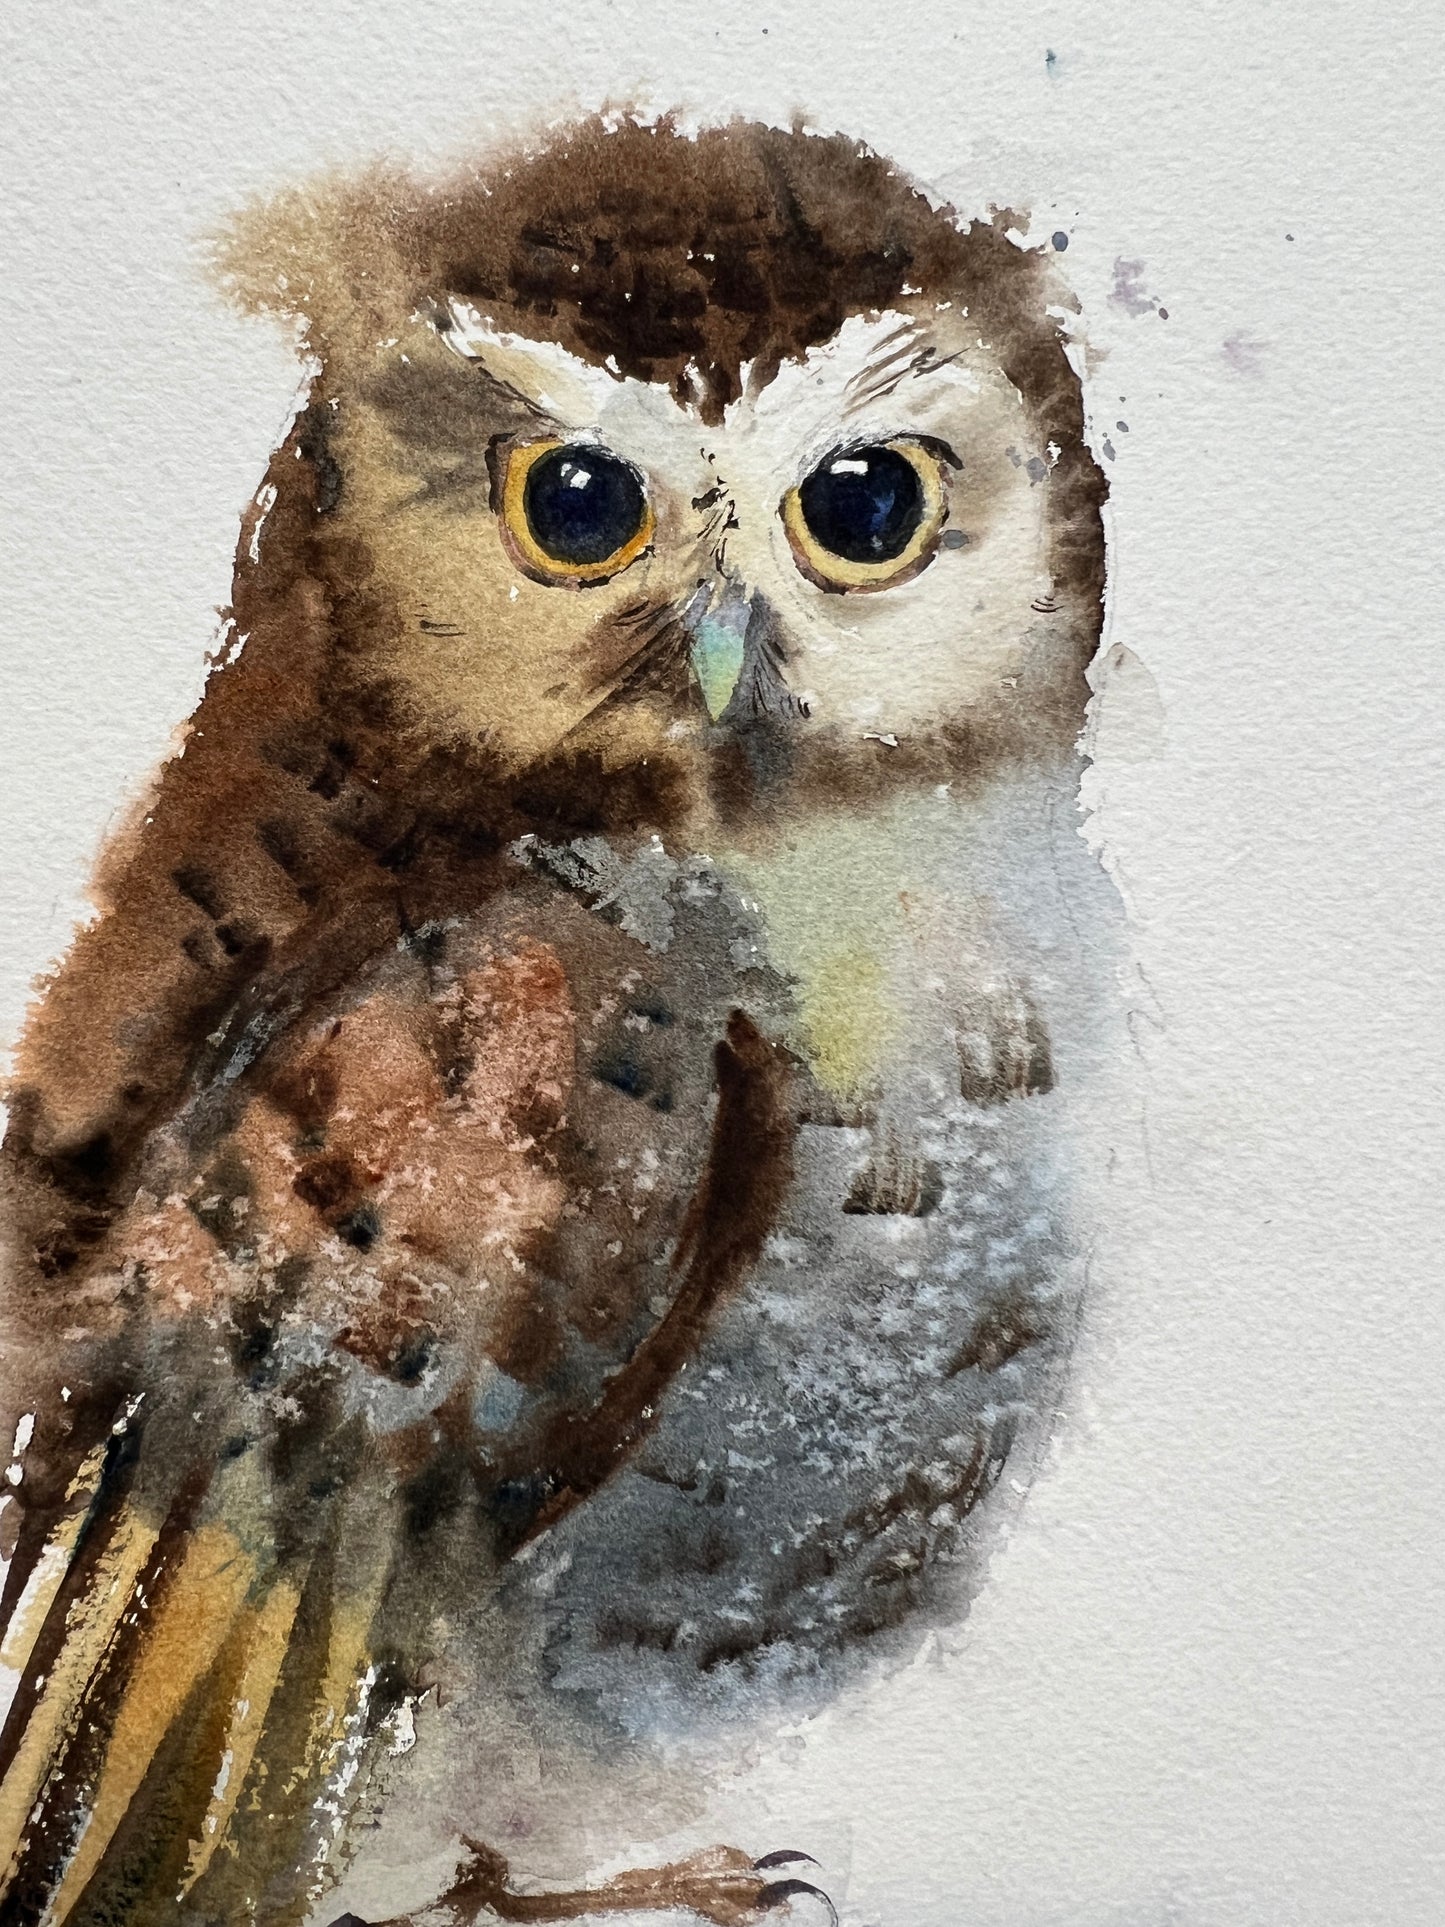 Little Owl Watercolor Painting, Small Original Artwork, New Year Christmas Gift For Bird Lover, Kids Room Wall Art Decor